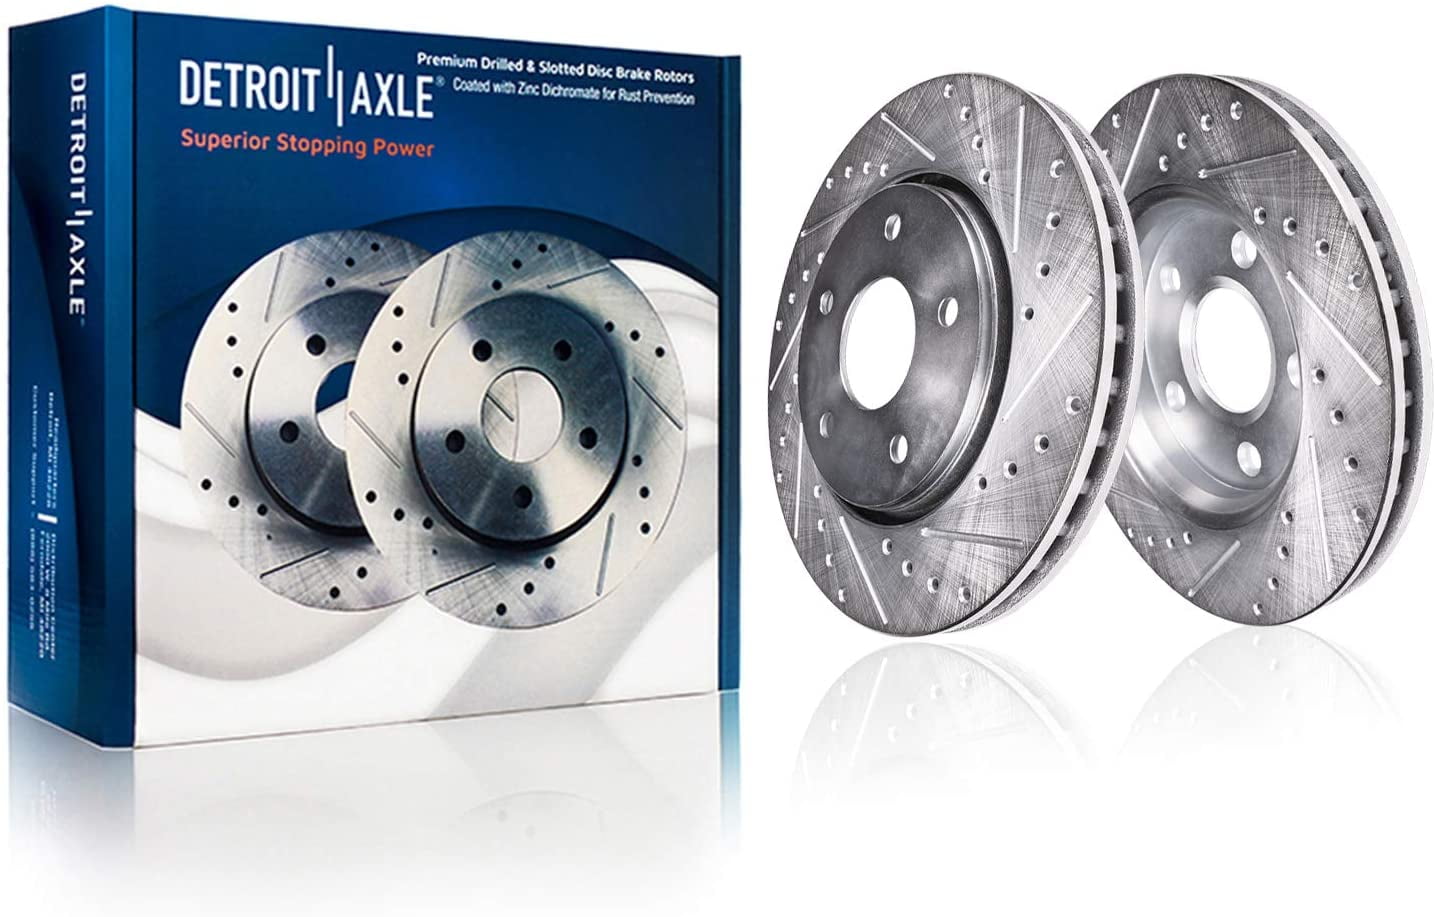 Front Kit Premium Drilled and Slotted Disc Brake Rotors with Ceramic Brake Pads